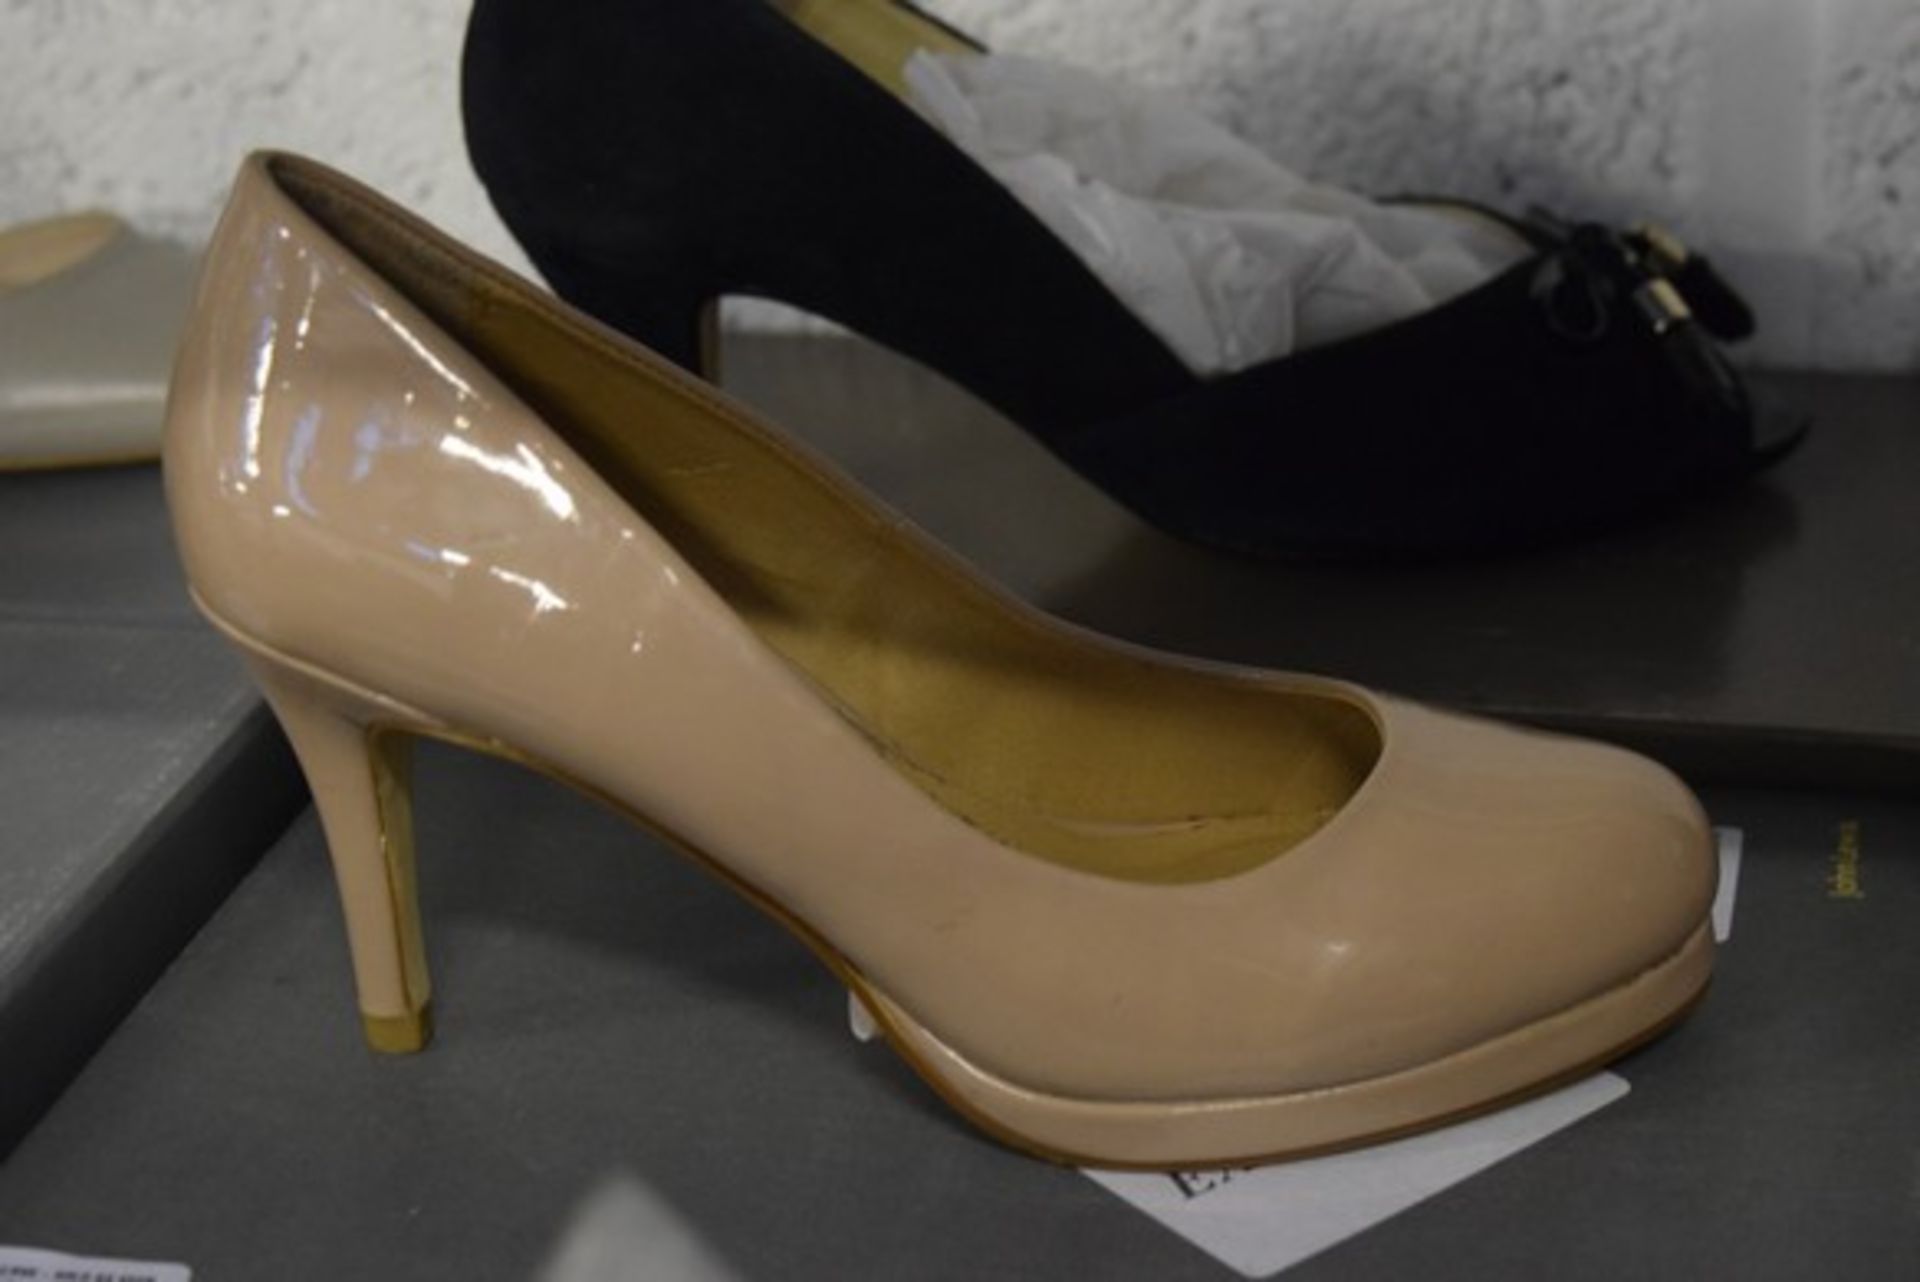 1 x BOXED PAIR OF LADIES DESIGNER HEELED SHOES SIZE 5 RRP £35 25.09.17 1.043 *PLEASE NOTE THAT THE